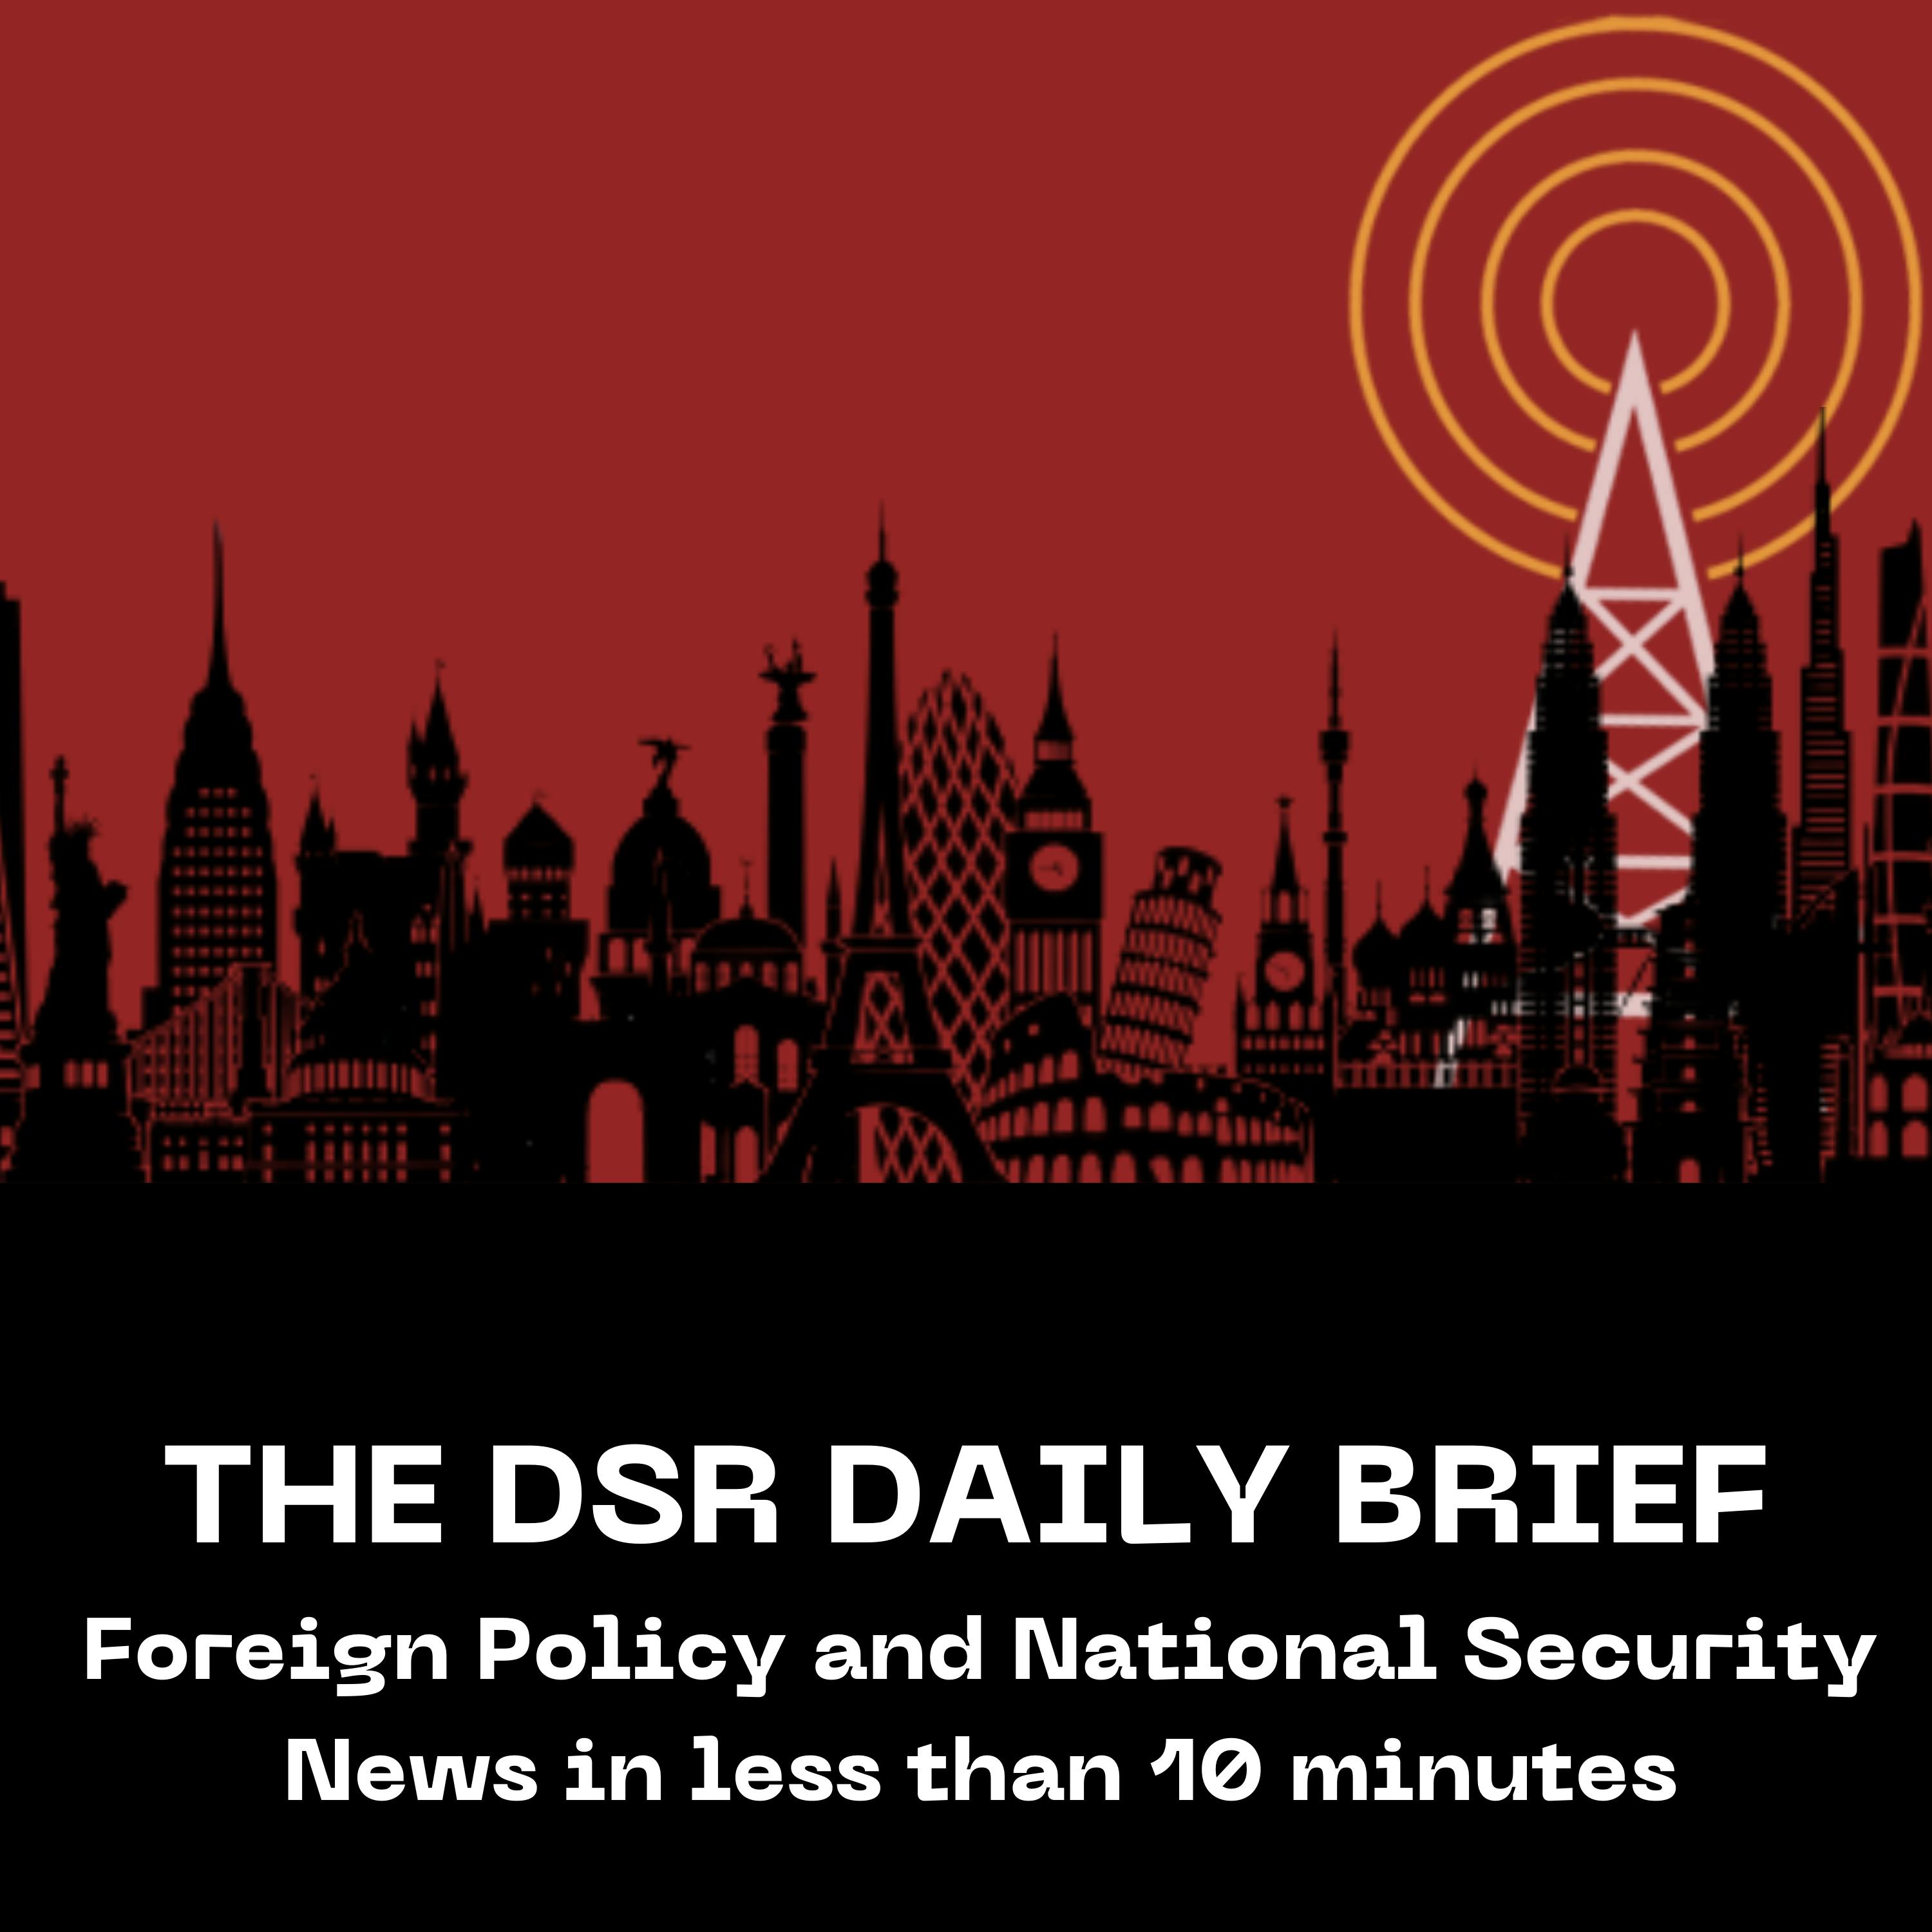 The DSR Daily for March 19: Hong Kong Passes New National Security Law, Supreme Court Extends Block on Texas Border Law